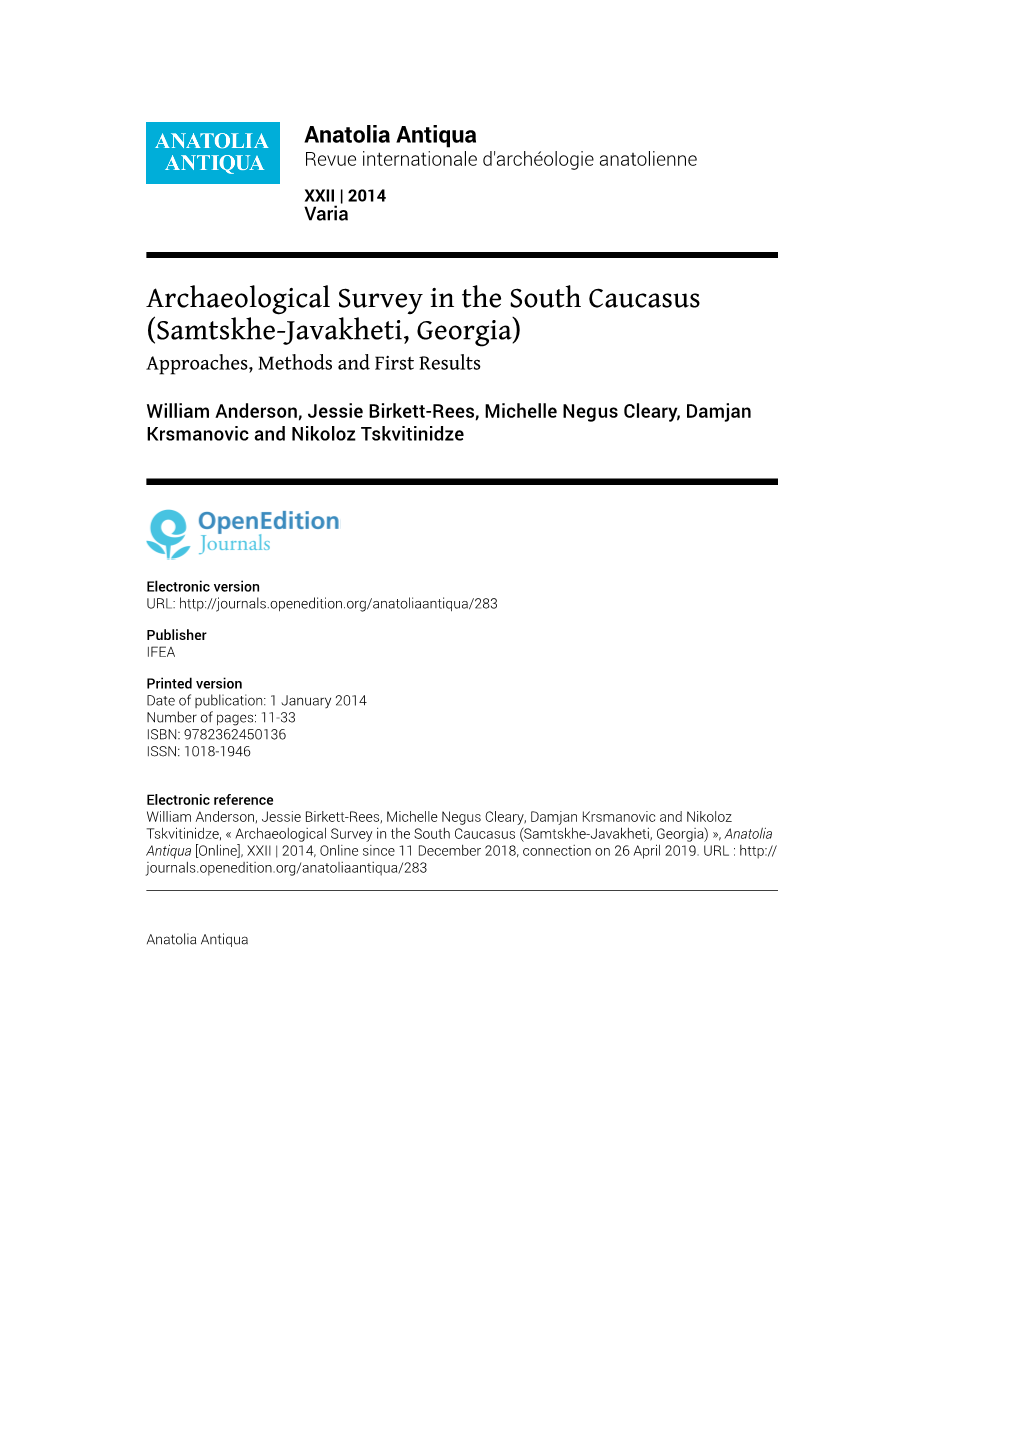 Archaeological Survey in the South Caucasus (Samtskhe-Javakheti, Georgia) Approaches, Methods and First Results